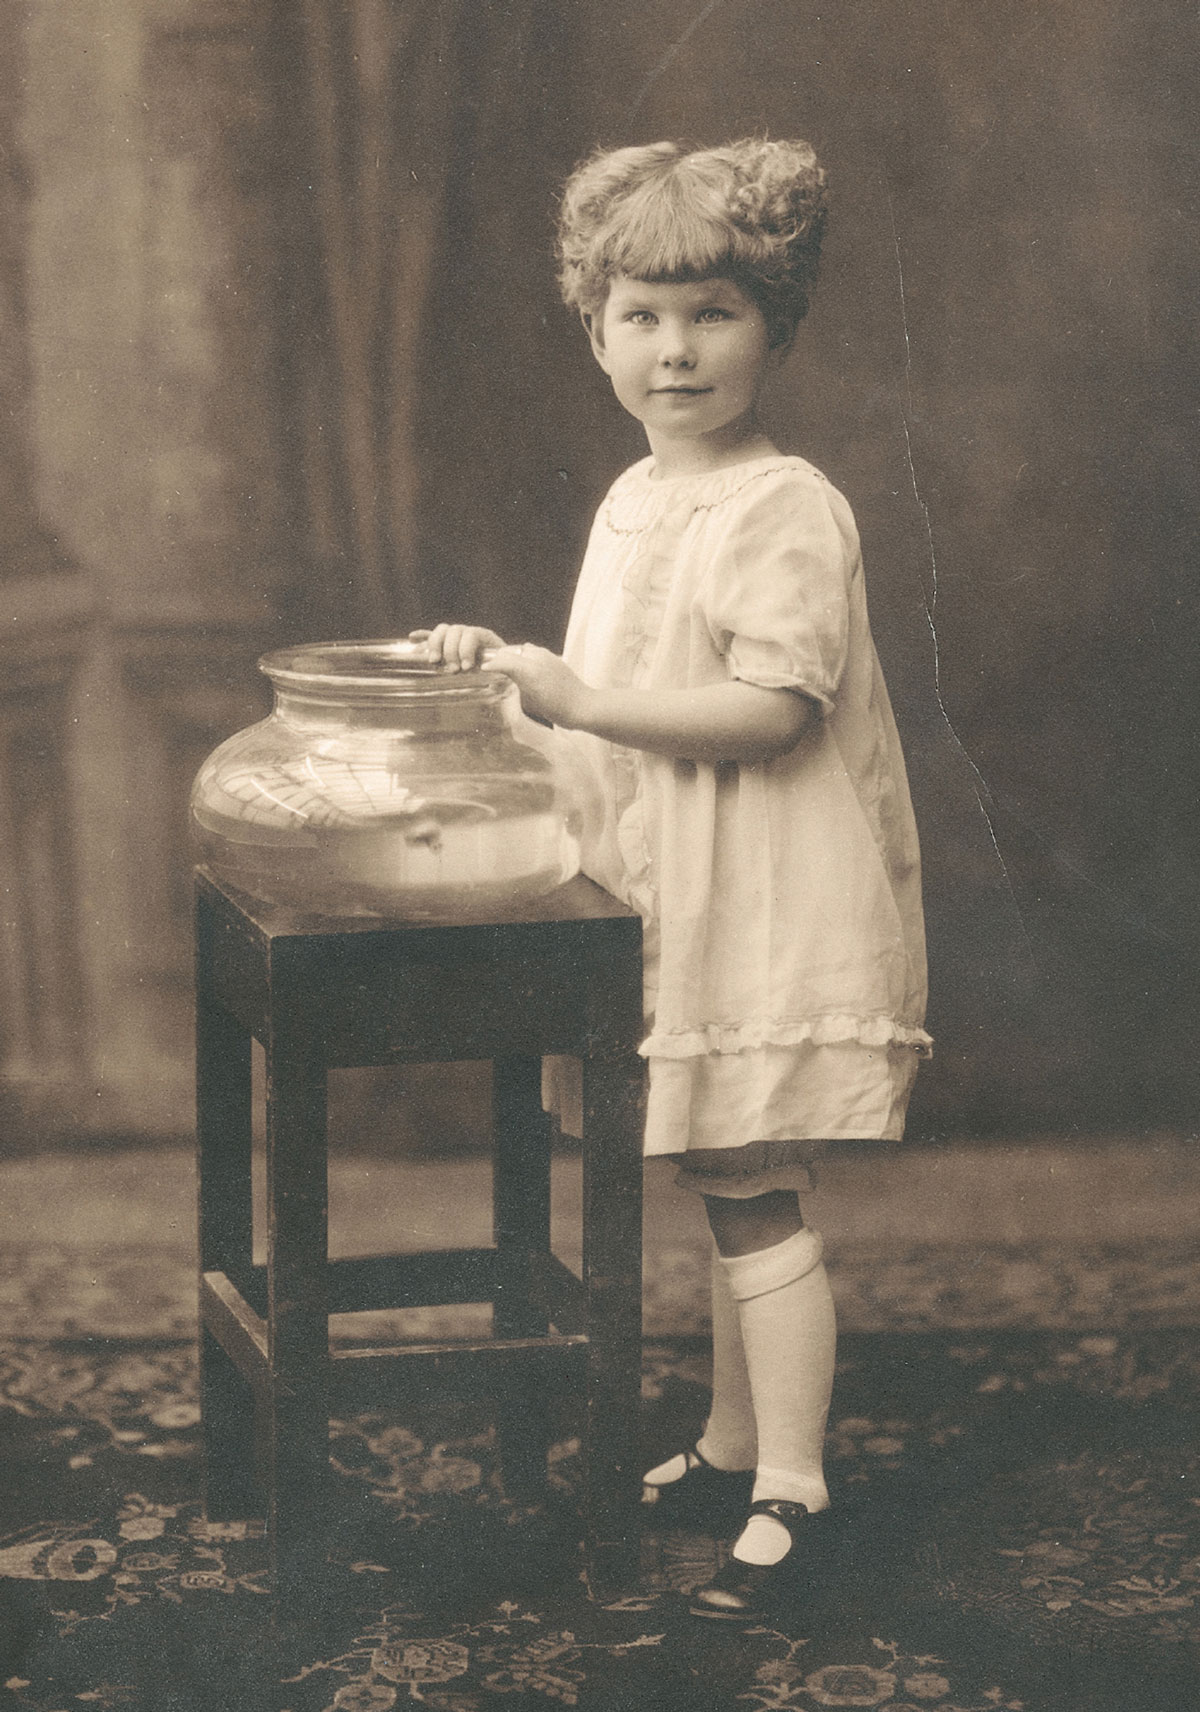 A photograph of a young girl in a dress and knee socks, taken before 1923.